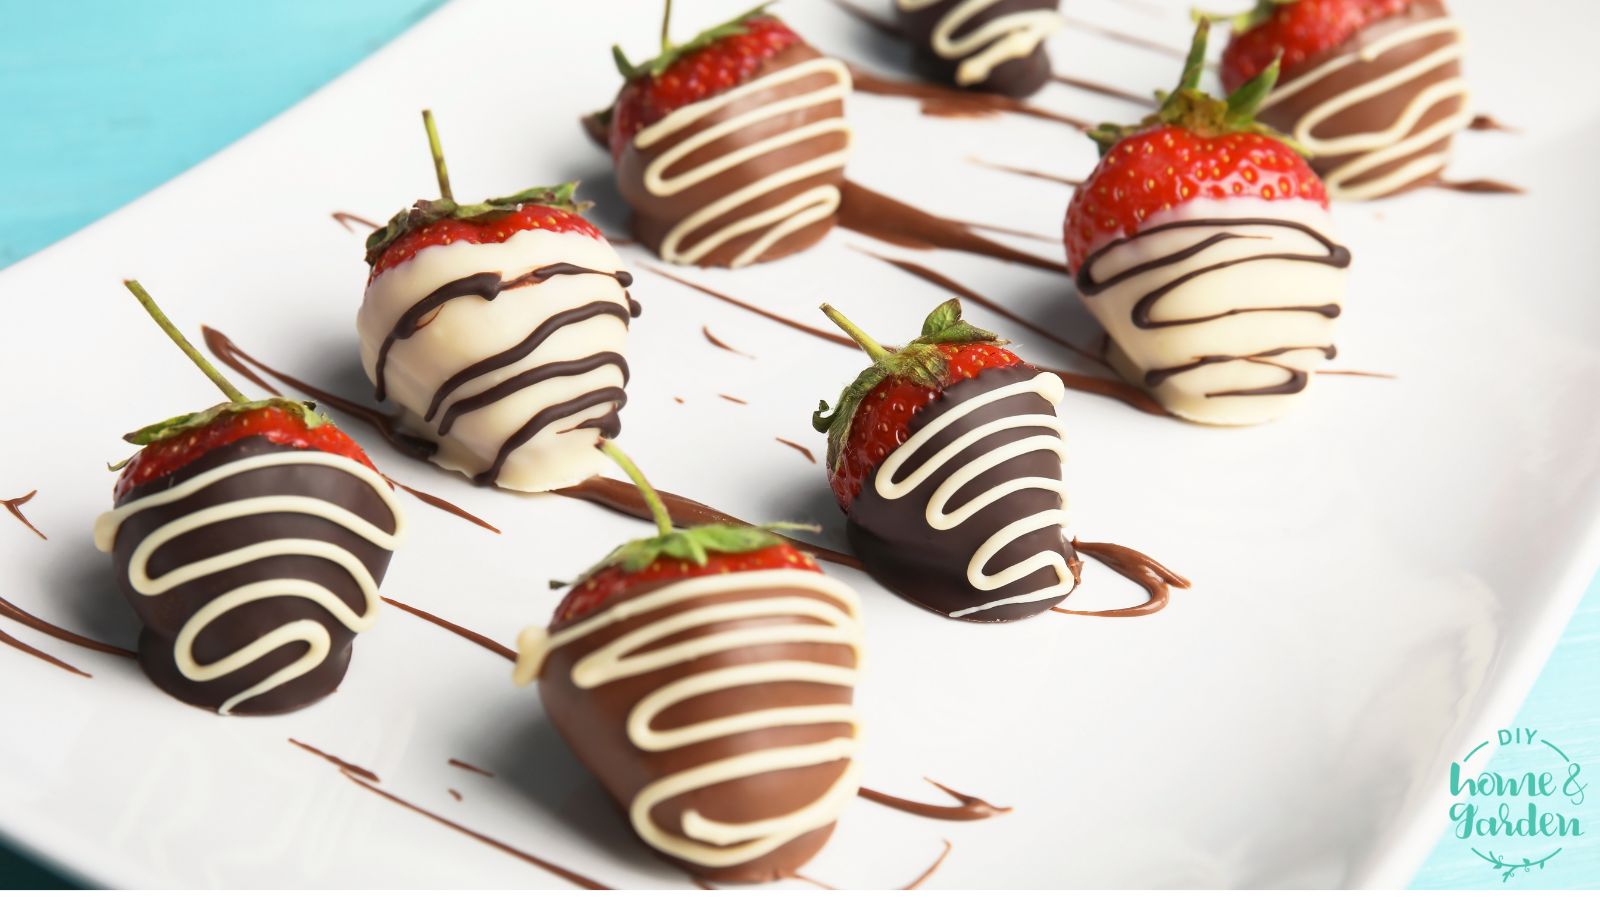 Chocolate Covered Strawberries: A Timeless Treat